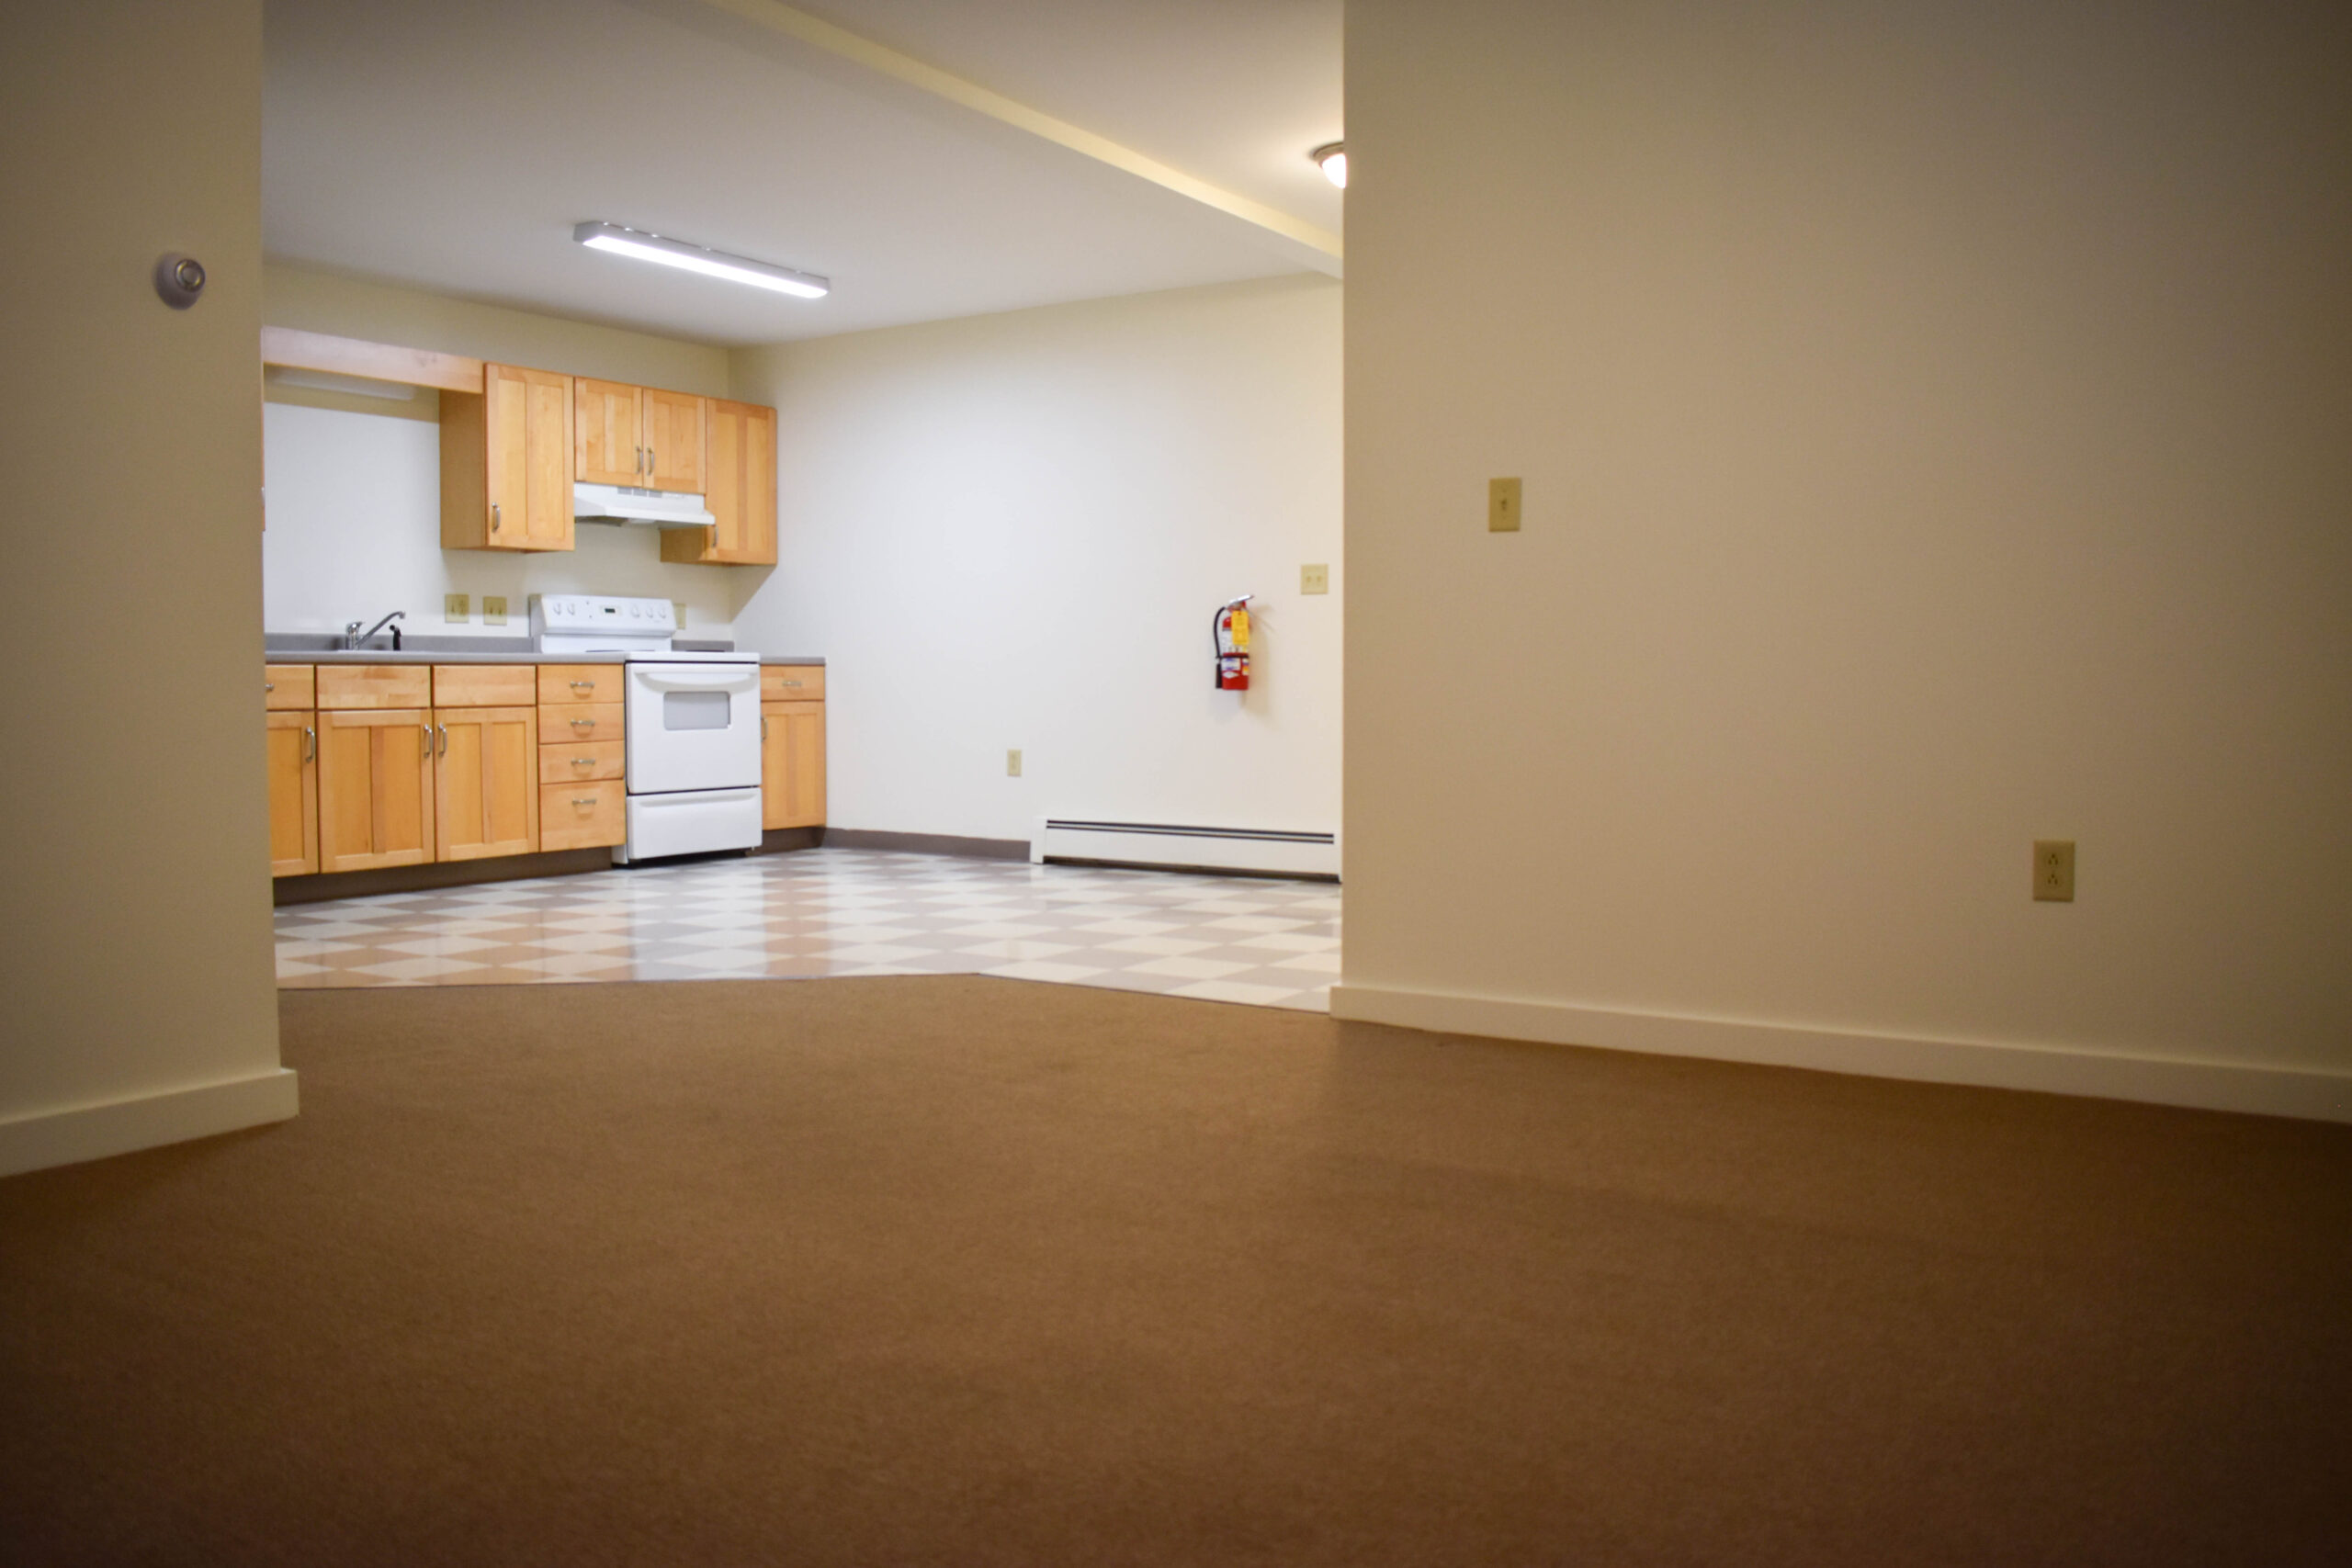 Center Lane apartment interior showing carpeted living room, opening into kitchen, with linoleum checker tile